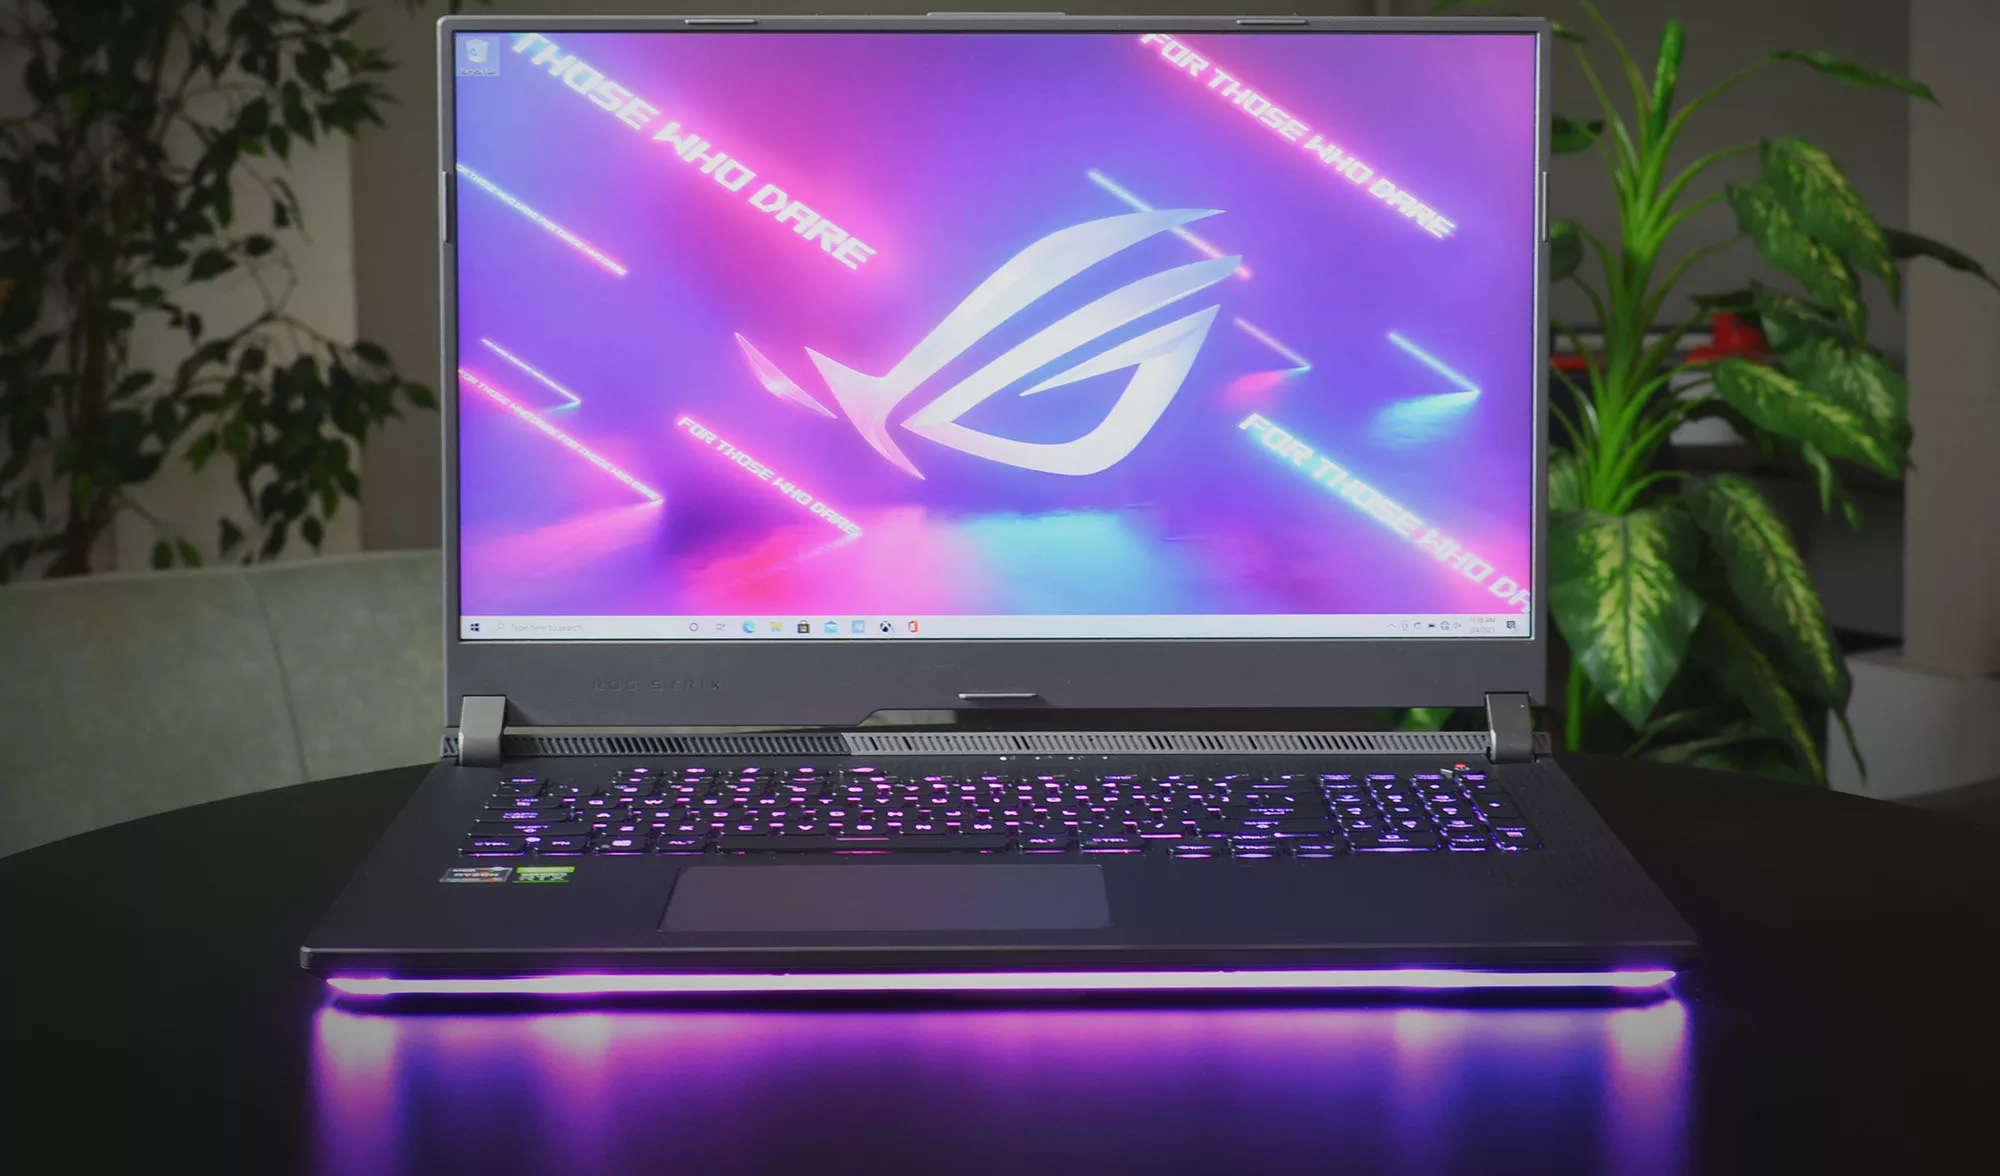 Front view of the ROG Strix G17, with bright purple RGB lighting.